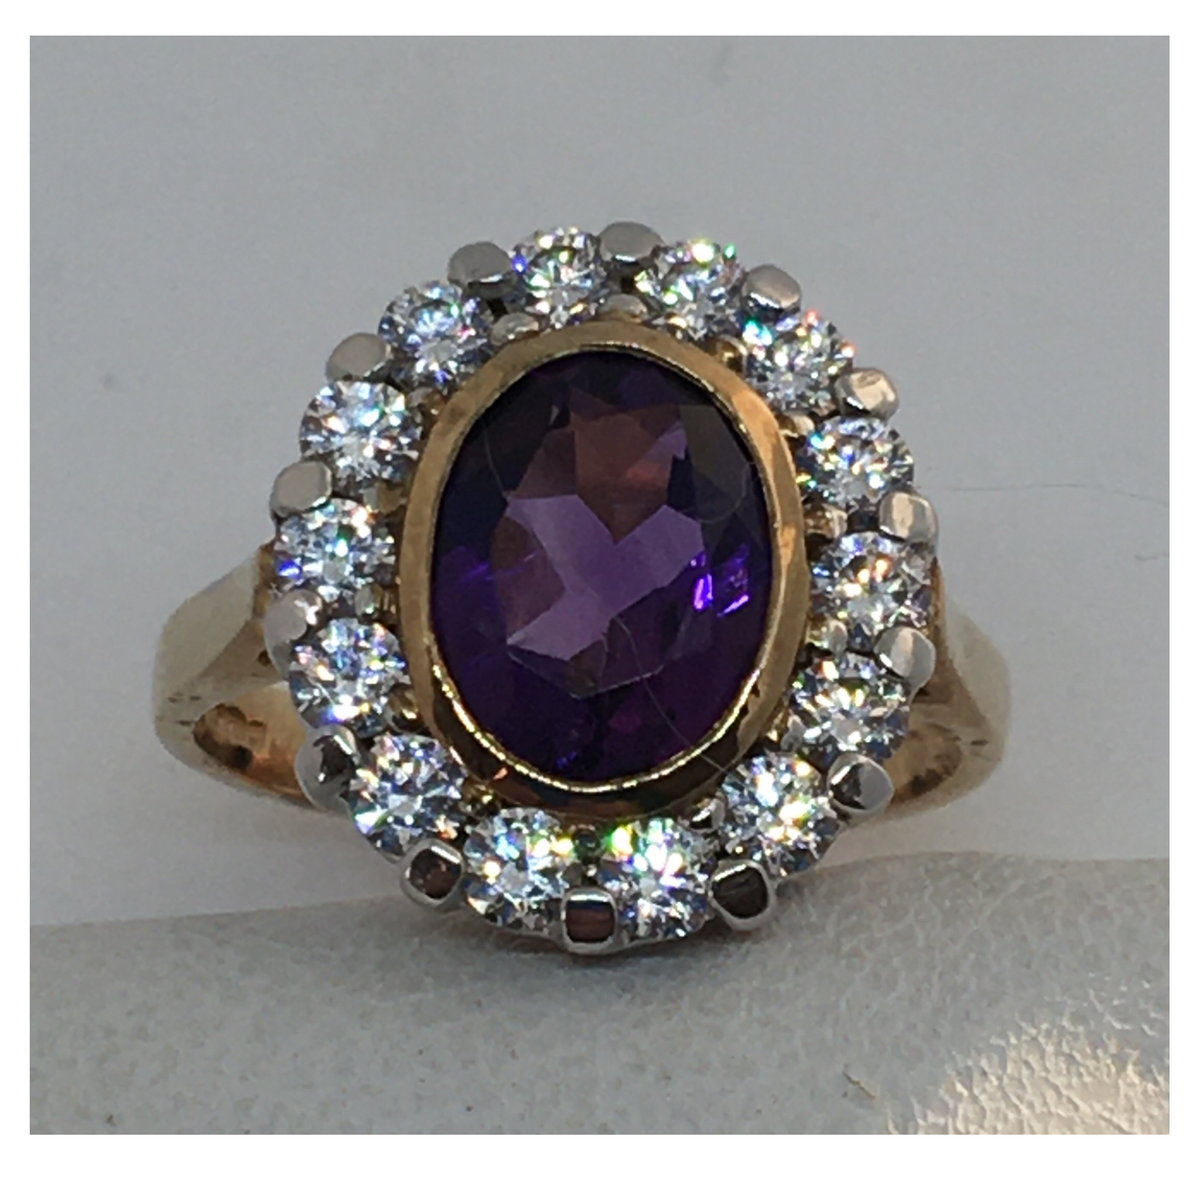 Large Amethyst Cluster Ring